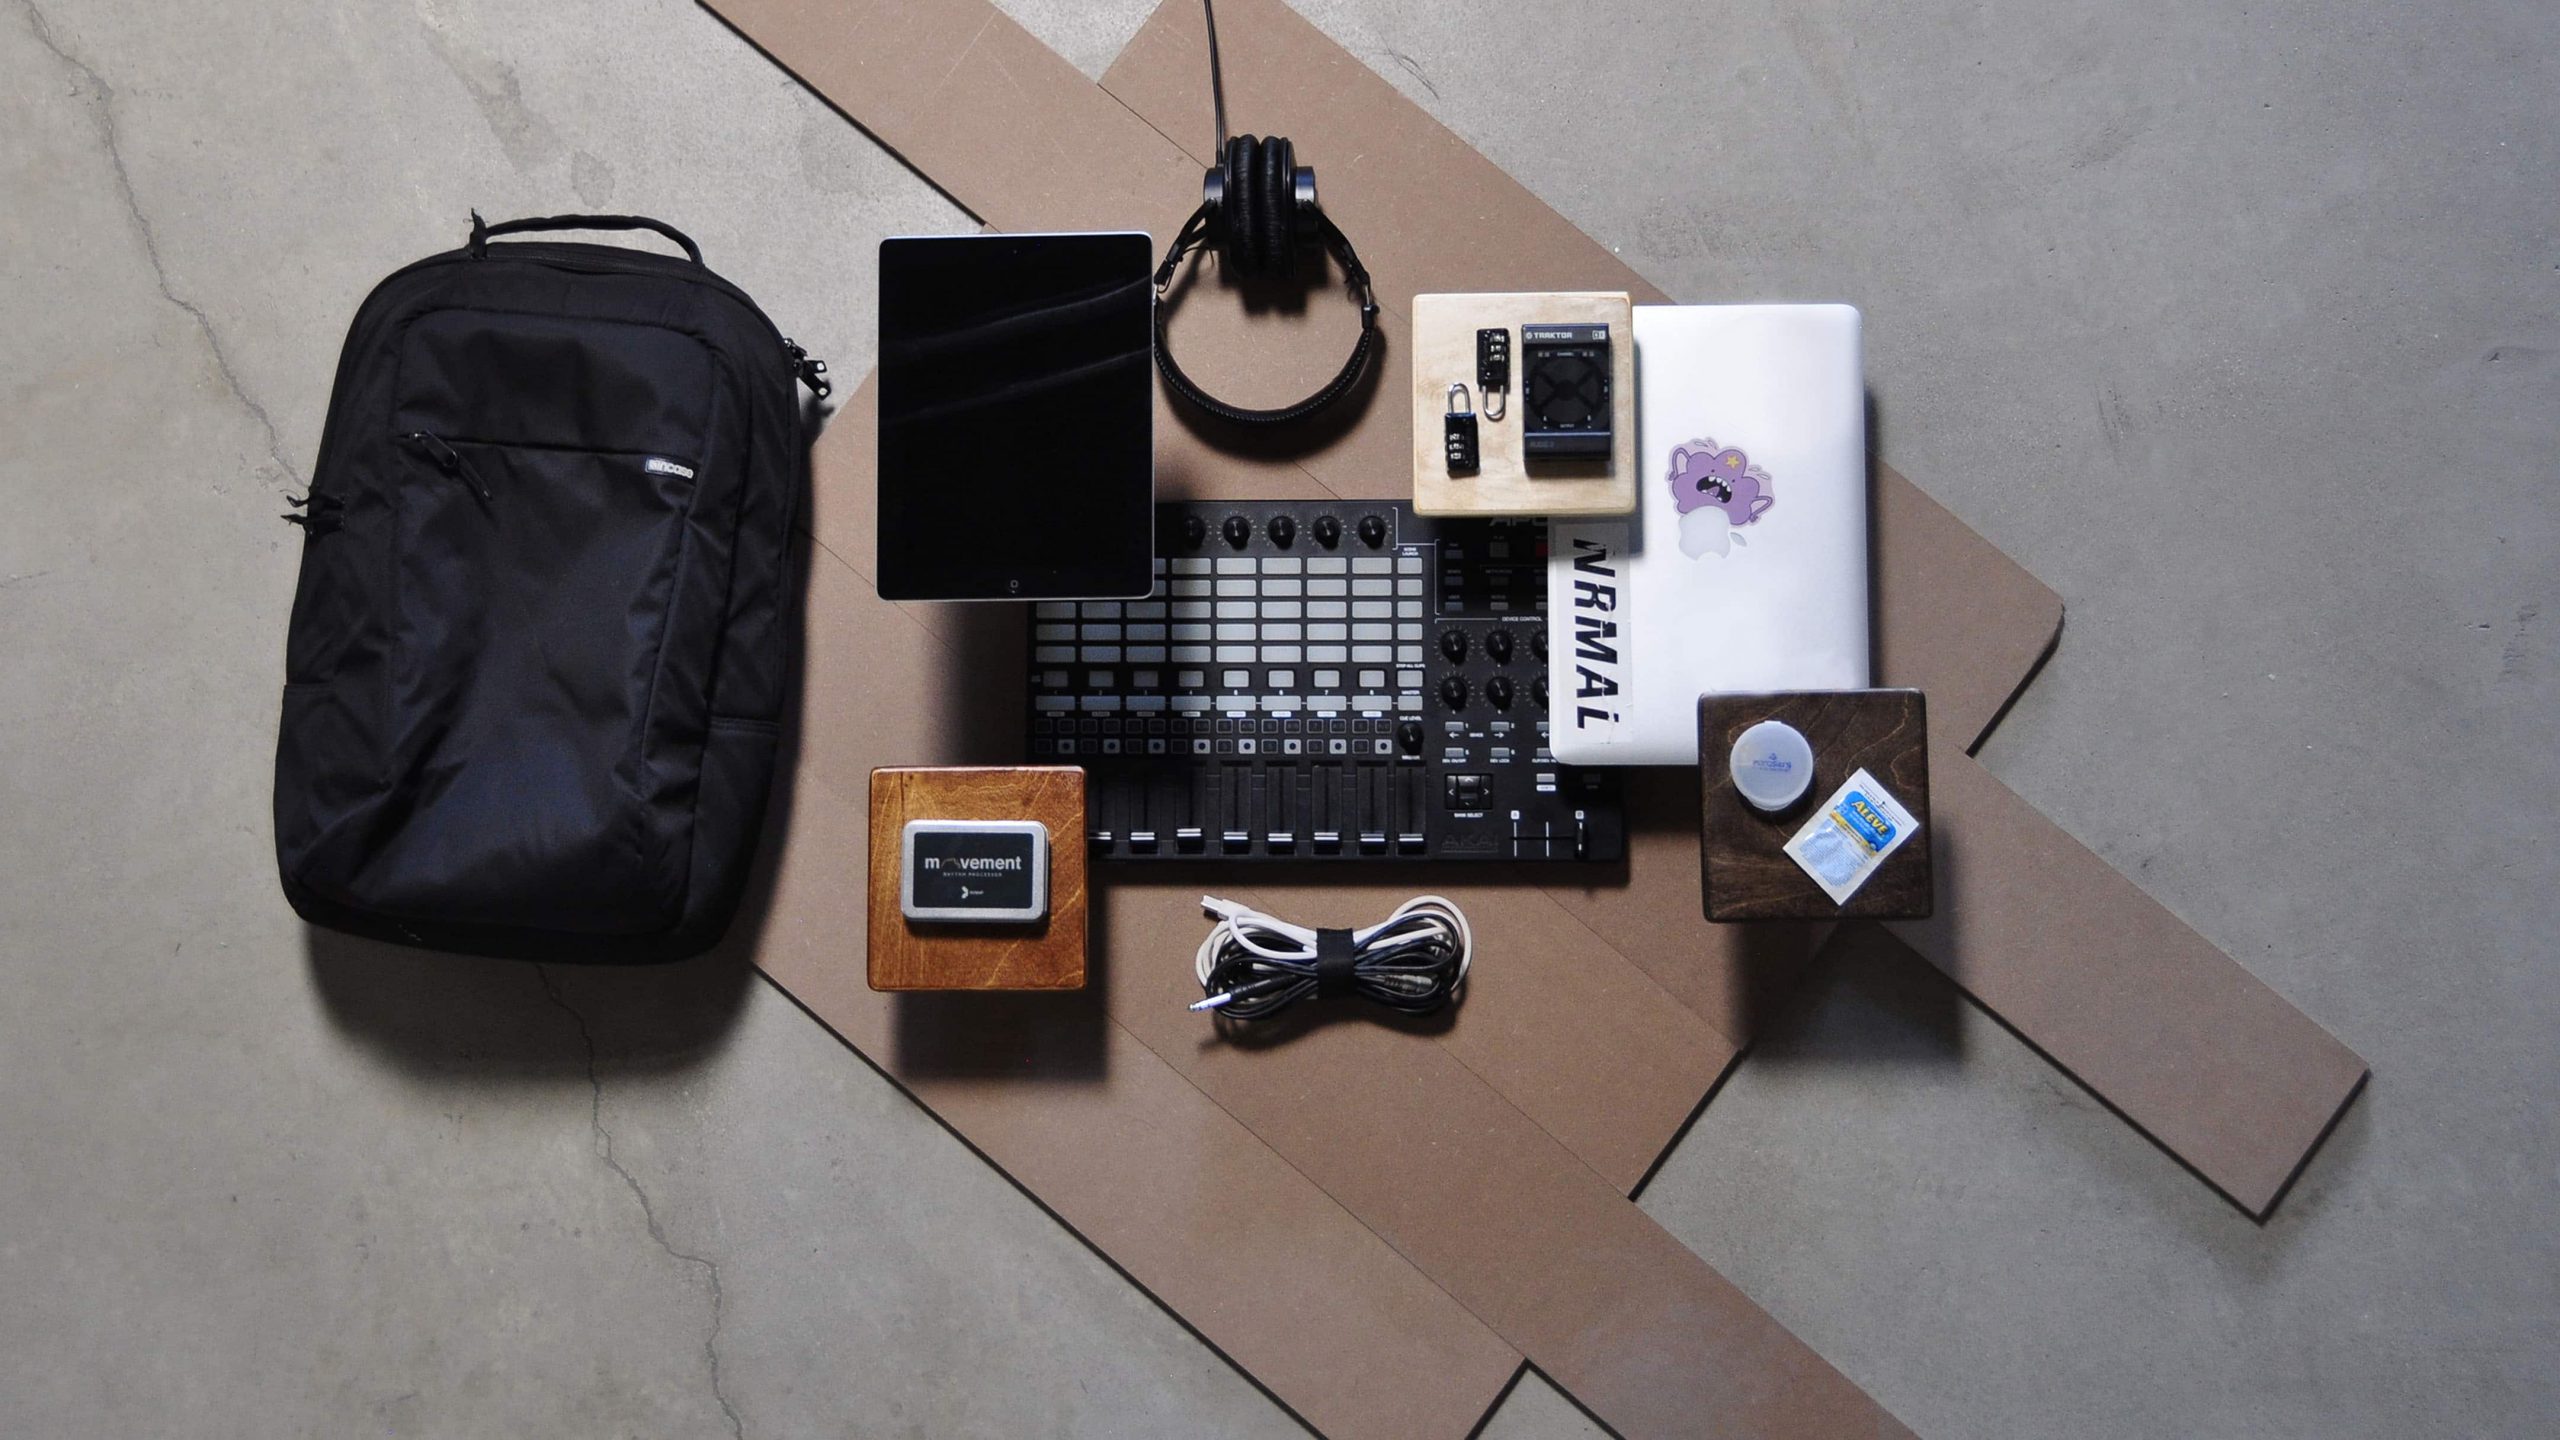 Travel essentials for musicians including an iPad, laptop, cables, headphones, suitcase locks, a MIDI controller, and external storage